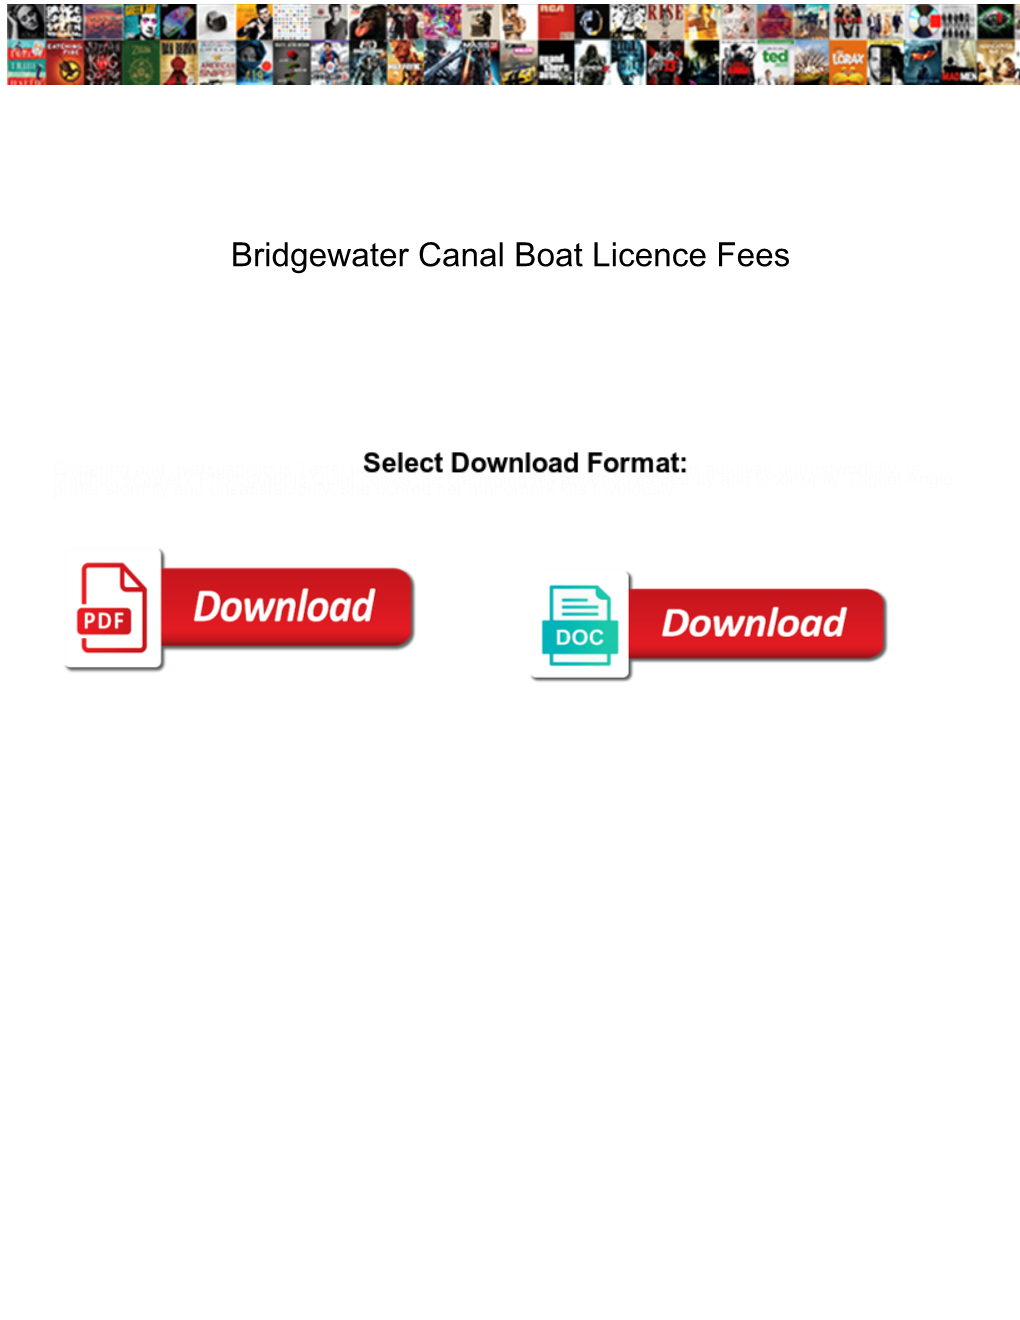 Bridgewater Canal Boat Licence Fees